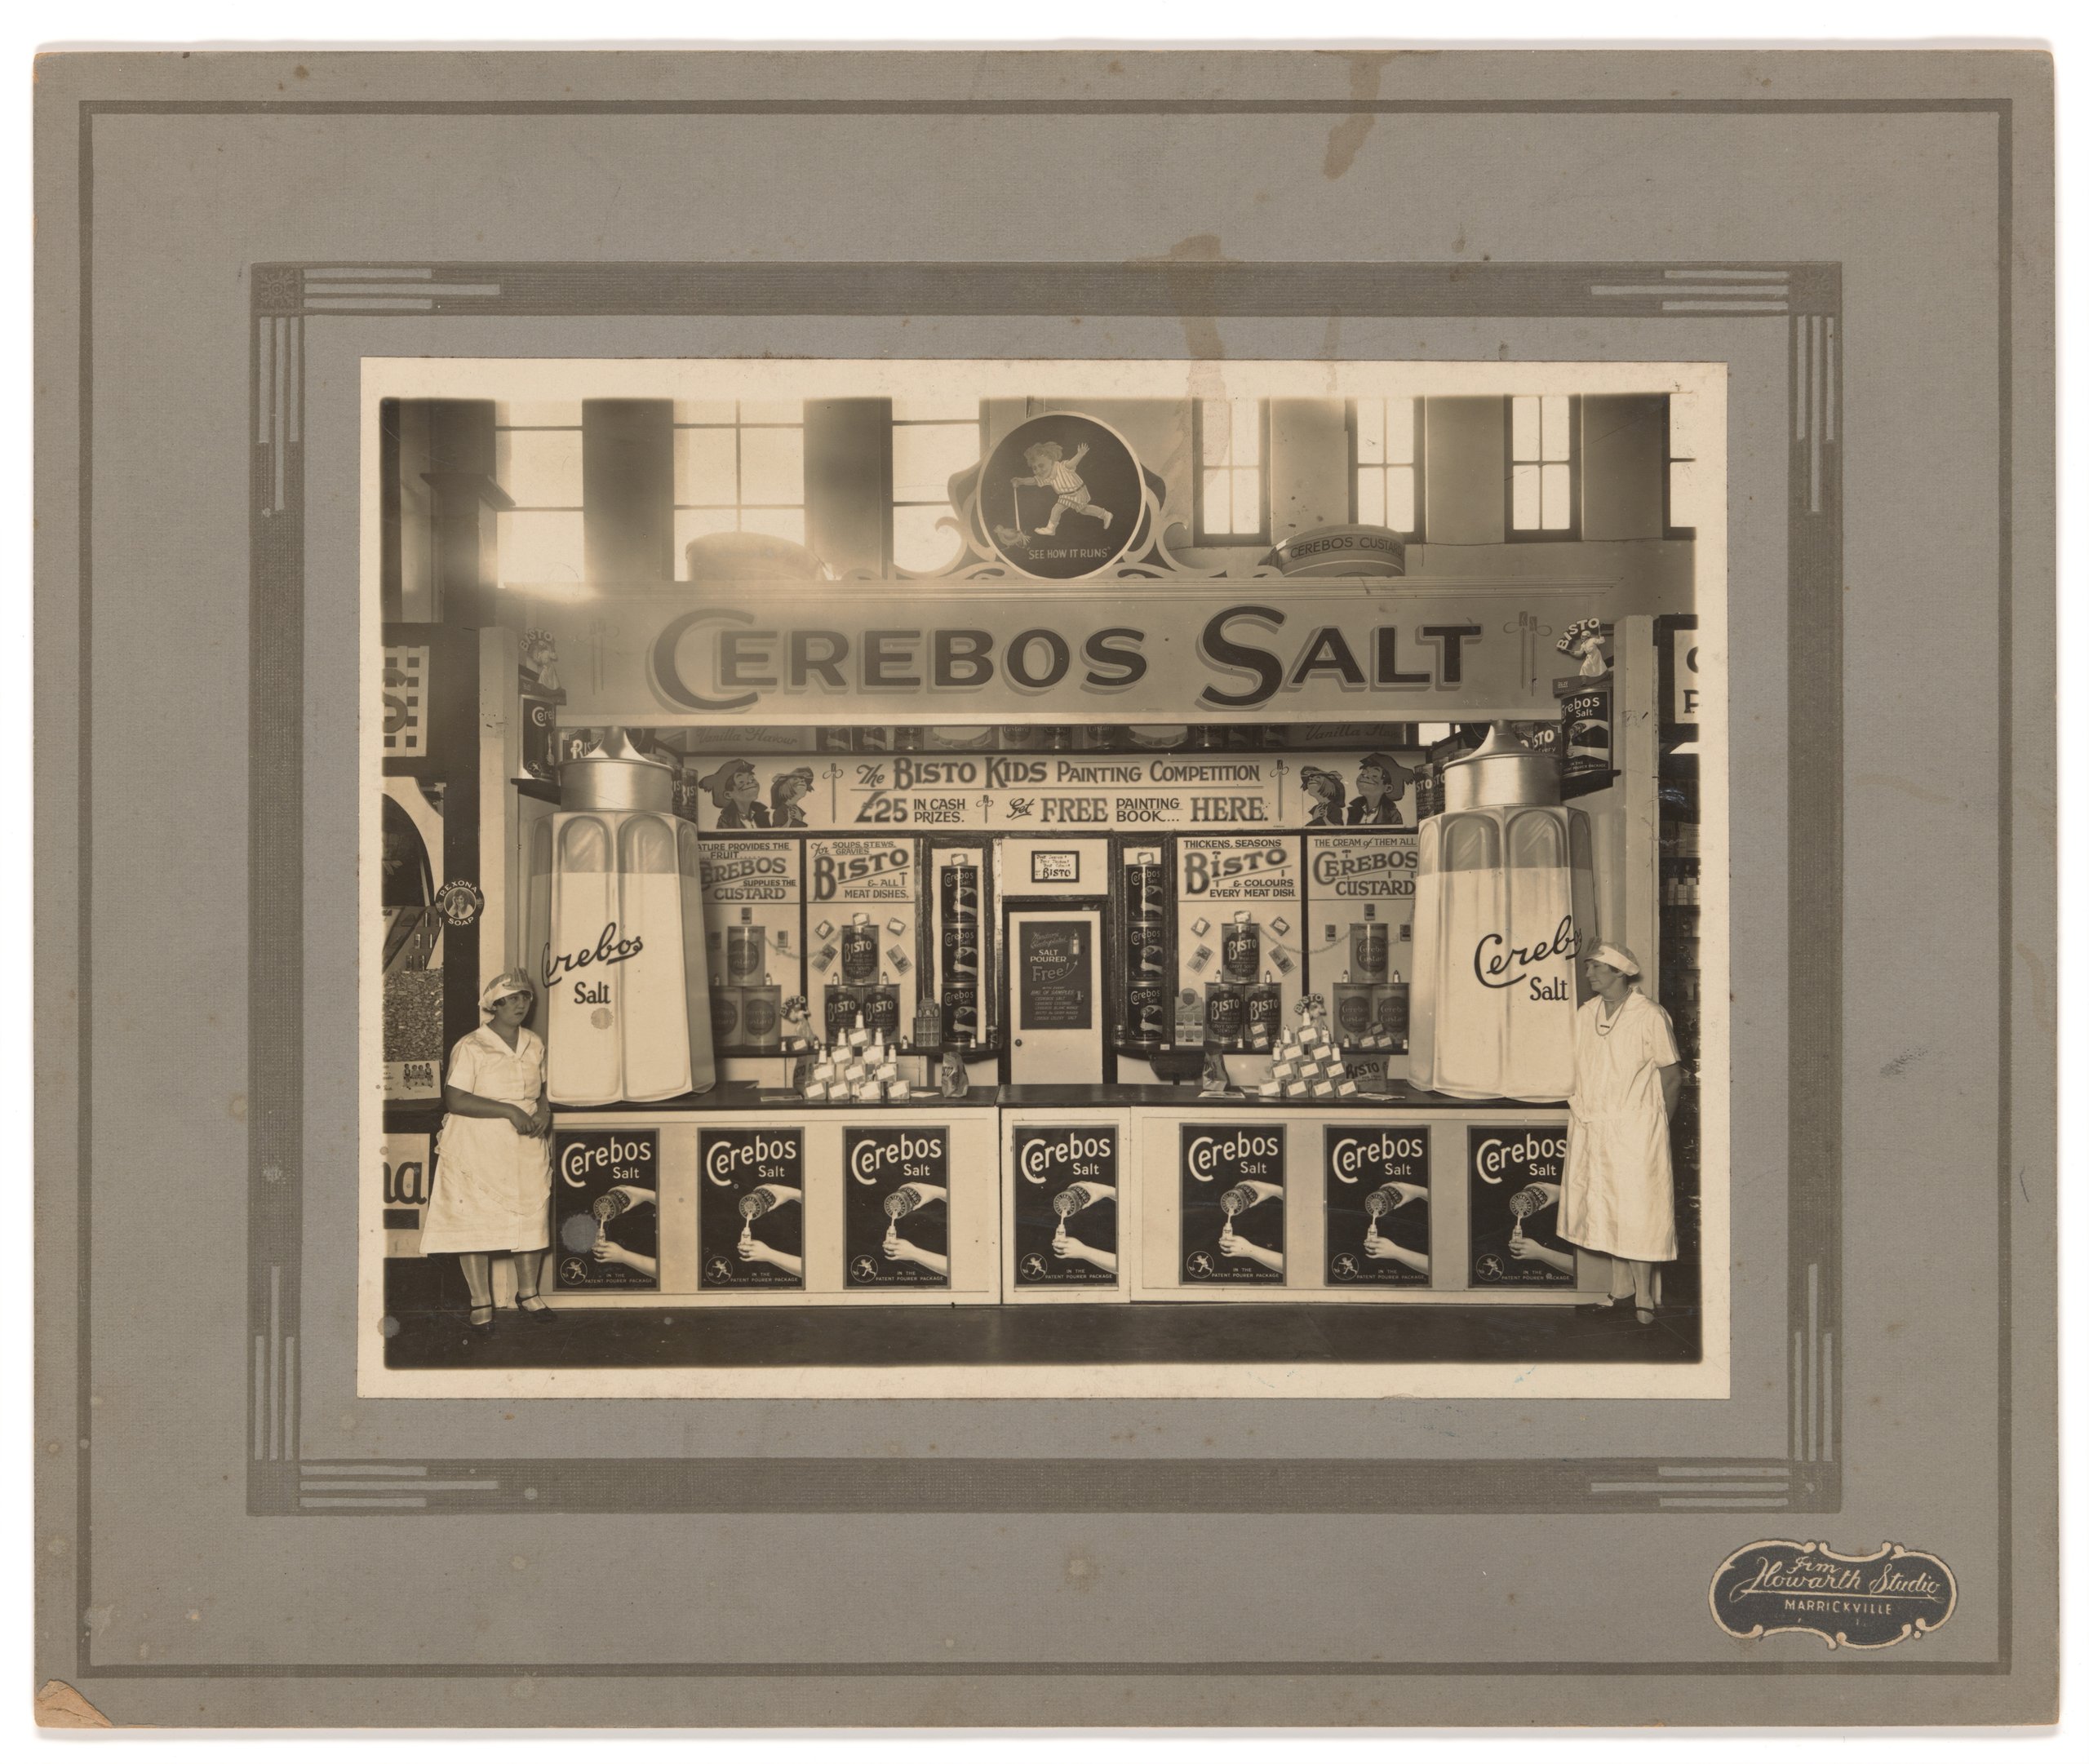 Photograph of promotional exhibit for Cerebos Salt at Sydney Royal Easter Show